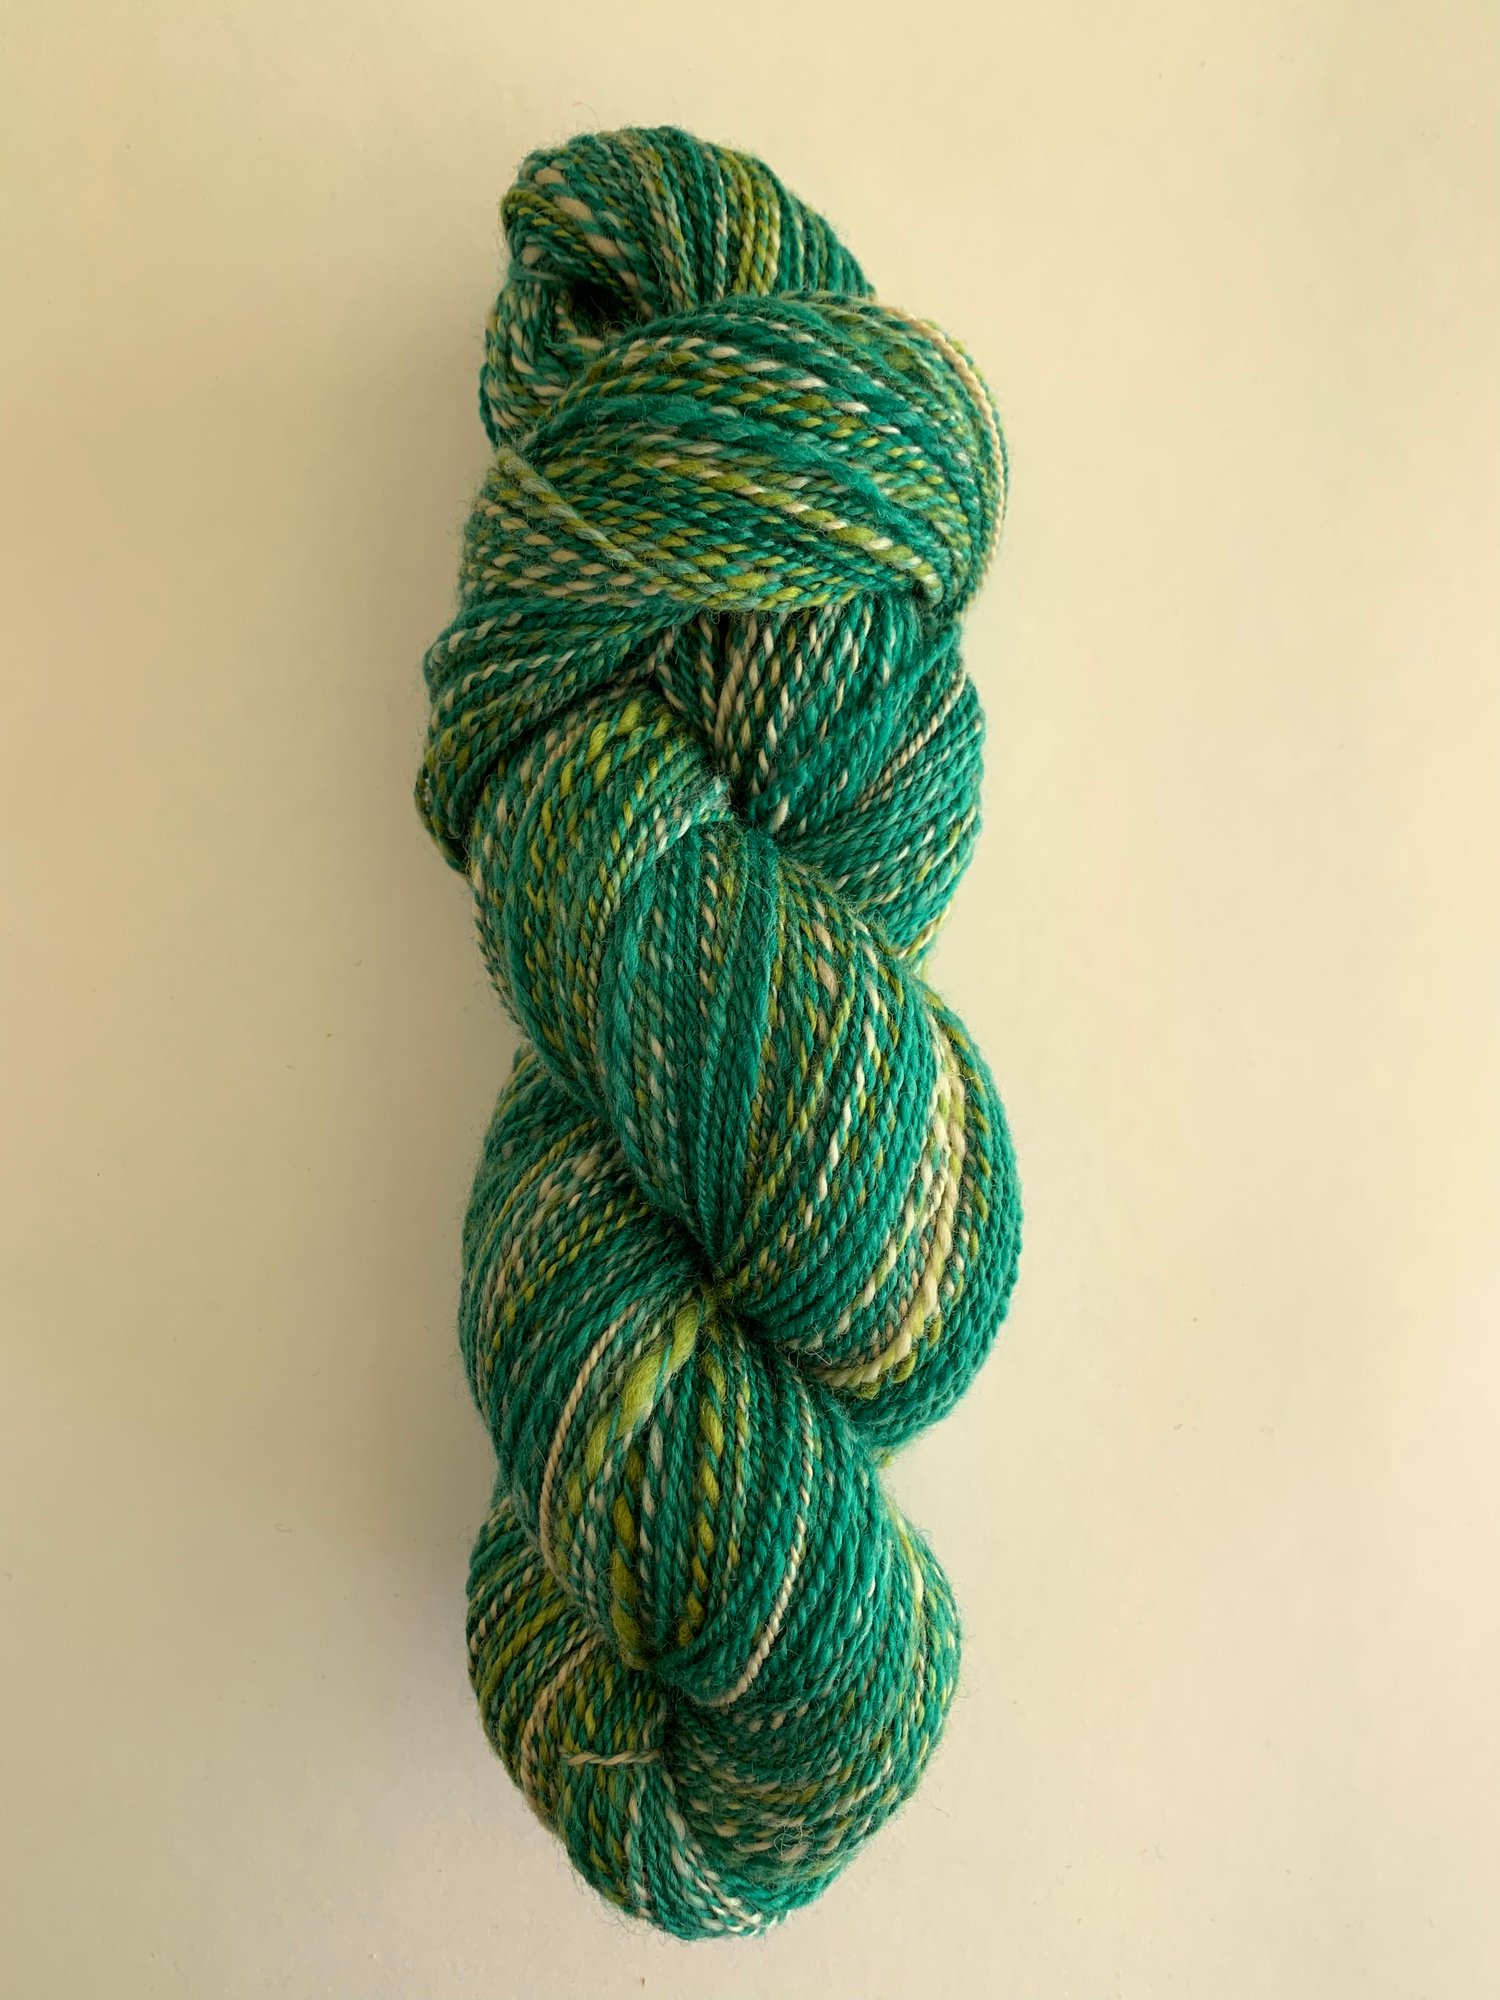 Hand Dyed and Hand Spun 2 Ply Green and Tan Yarn - BFL - Payhip